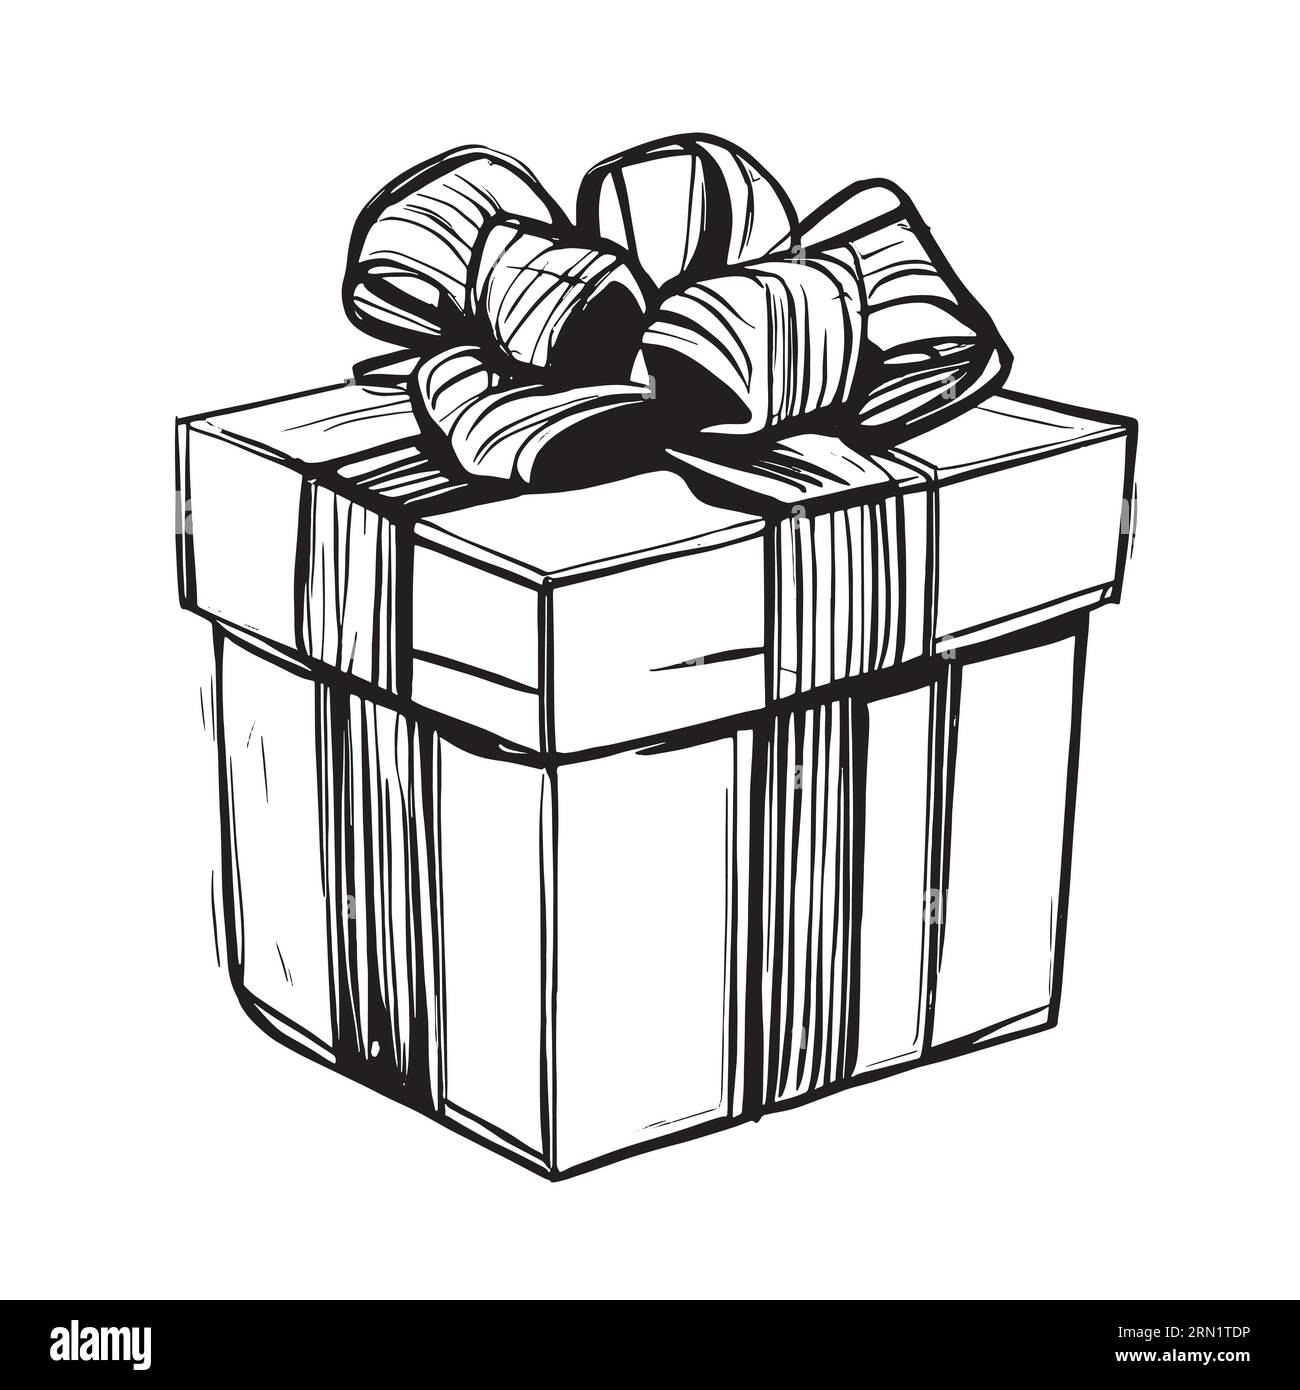 https://c8.alamy.com/comp/2RN1TDP/hand-drawn-sketch-of-gift-box-vector-illustration-isolated-on-white-background-2RN1TDP.jpg